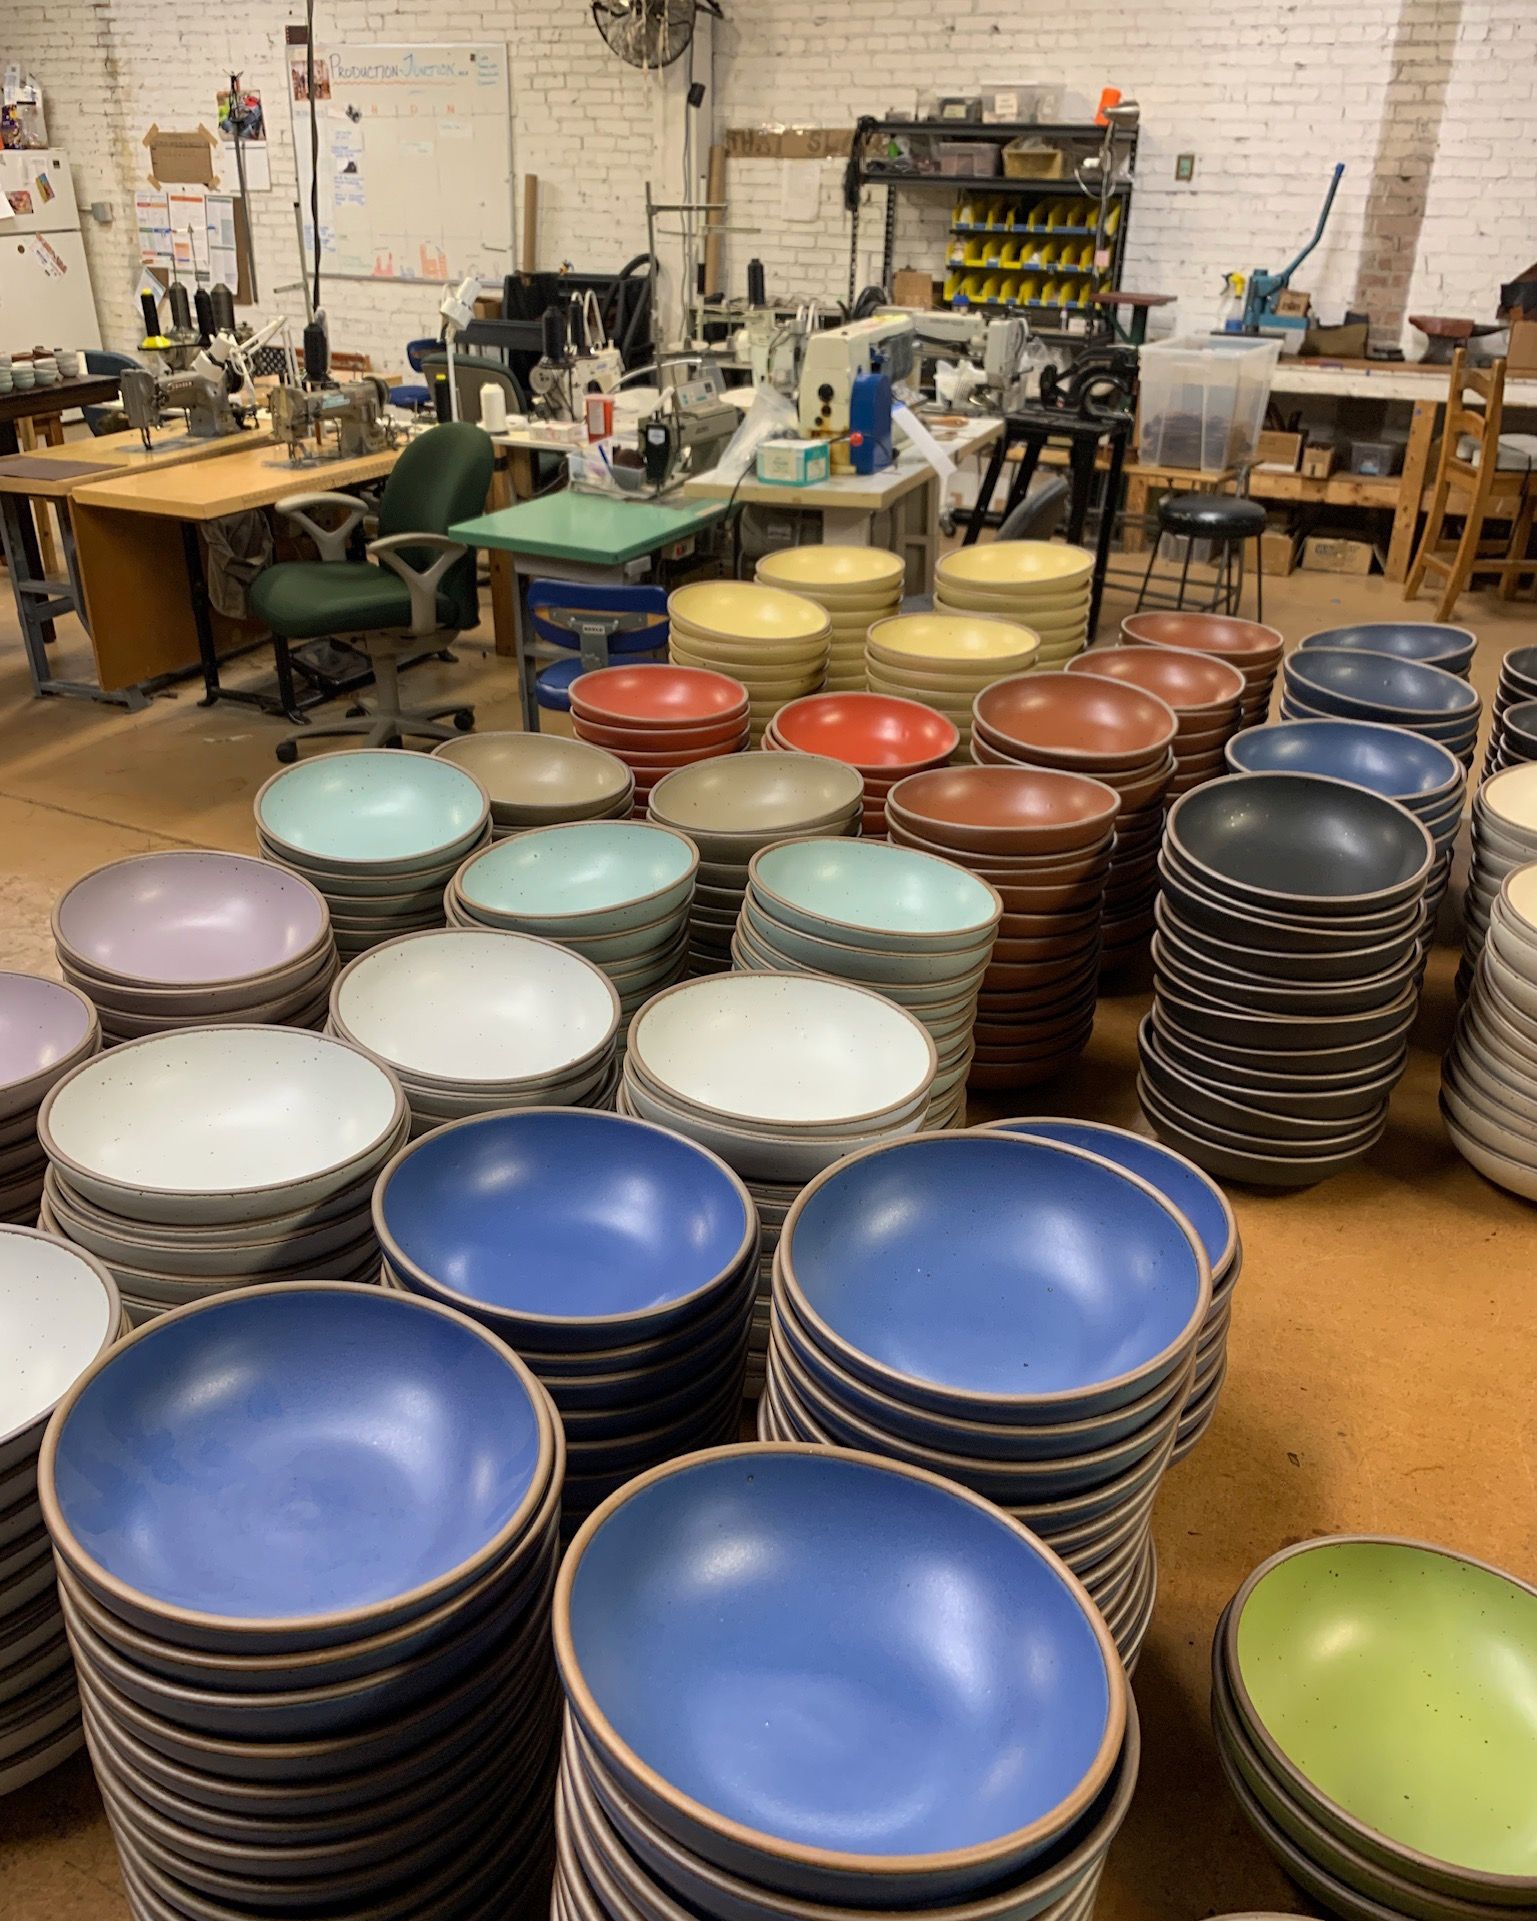 In a workshop setting, there are large stacks of ceramic bowls and plates in all different colors of the rainbow arranged on a table